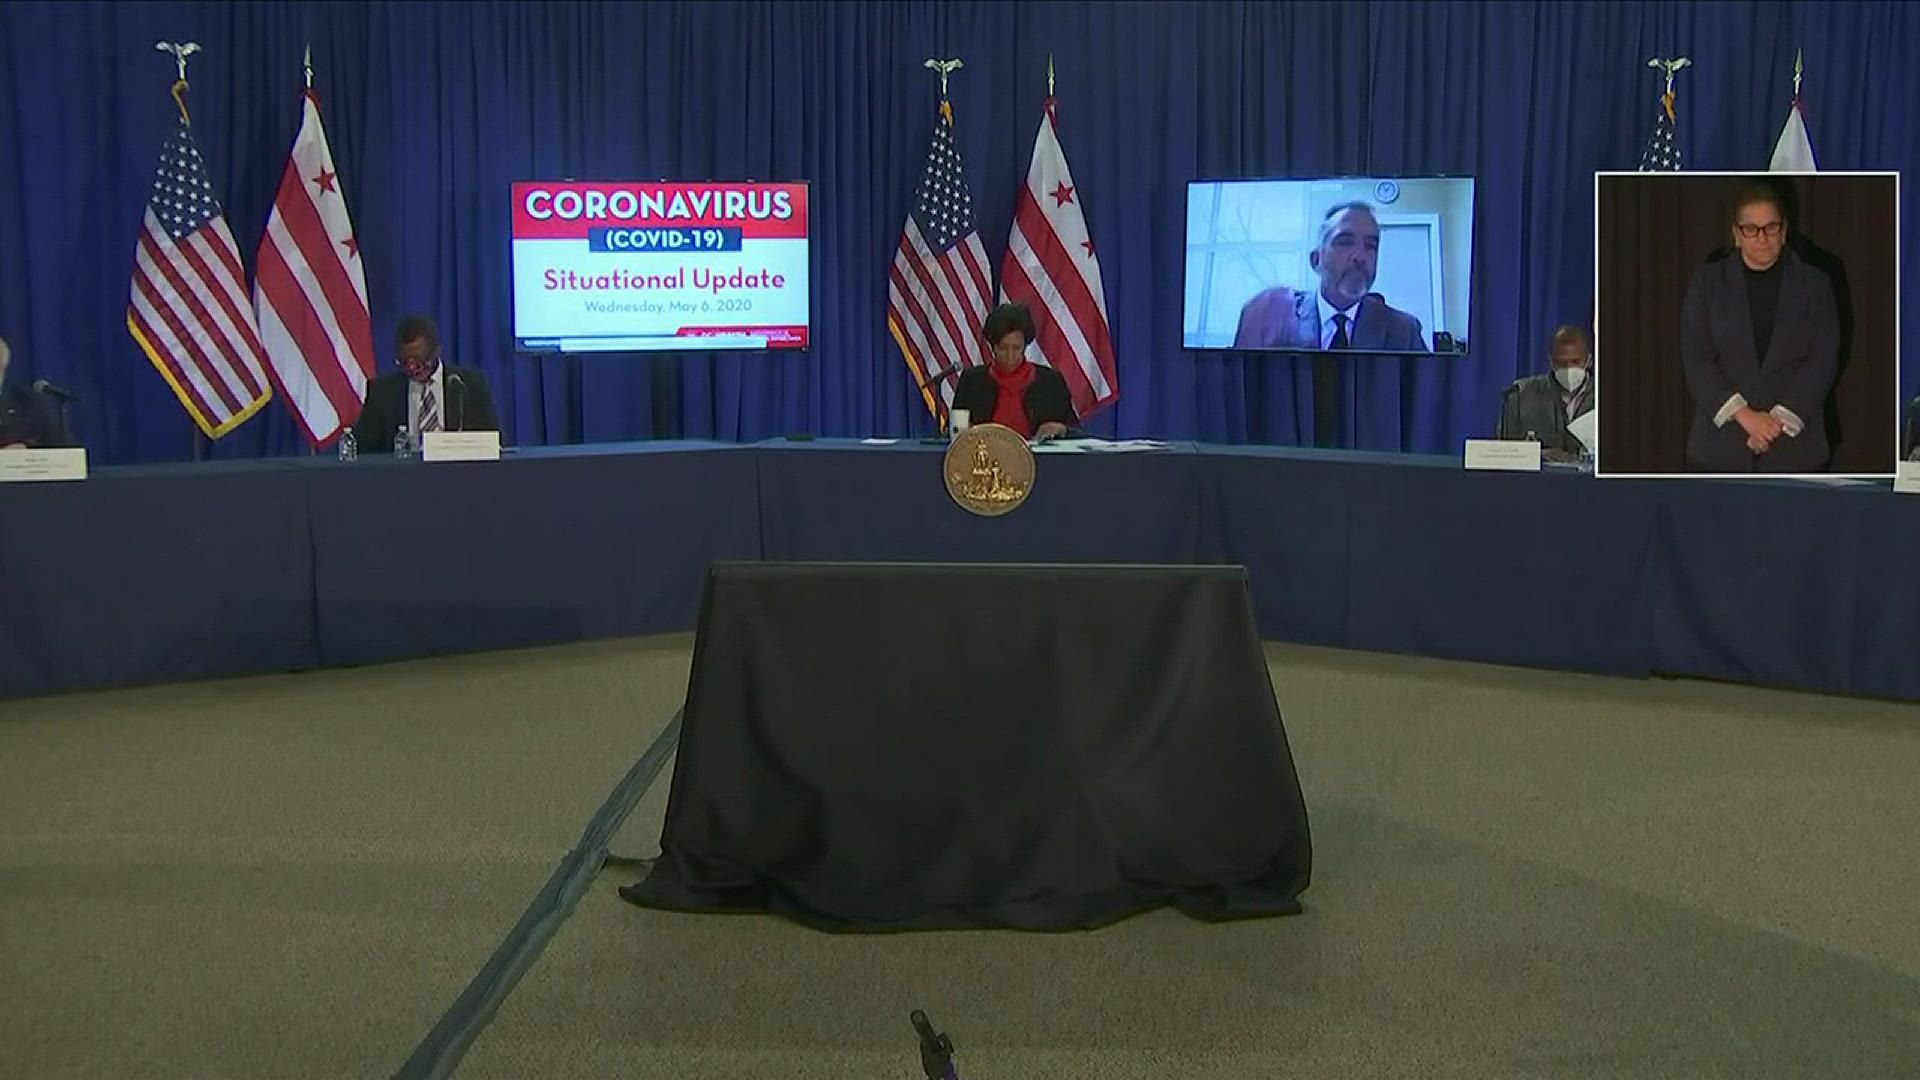 Mayor Muriel Bowser and National Tourism leaders also shared details on the city's tourism recovery efforts following the coronavirus pandemic.